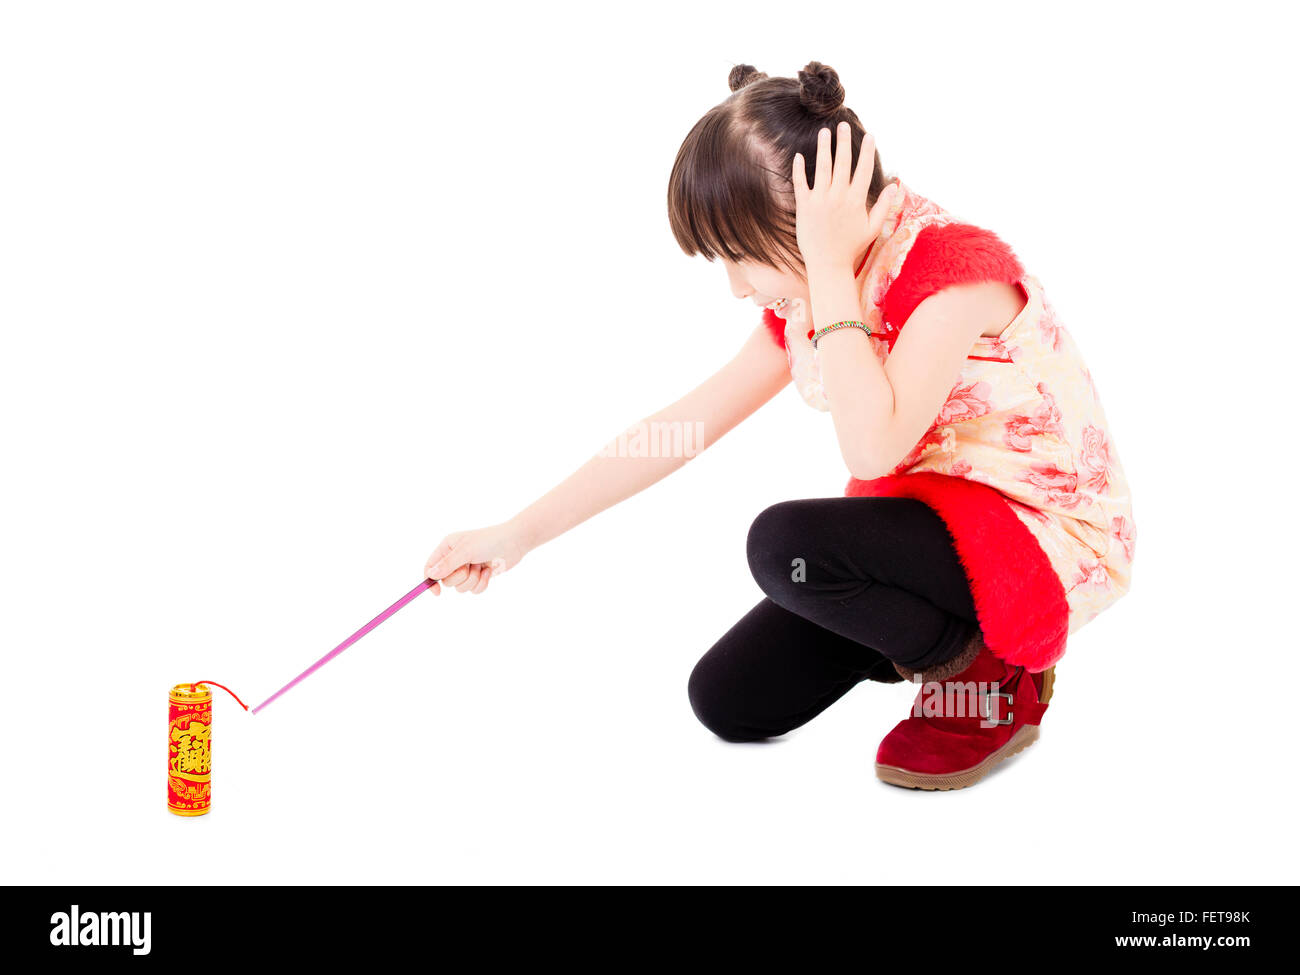 happy chinese new year. kids playing with firecracker Stock Photo